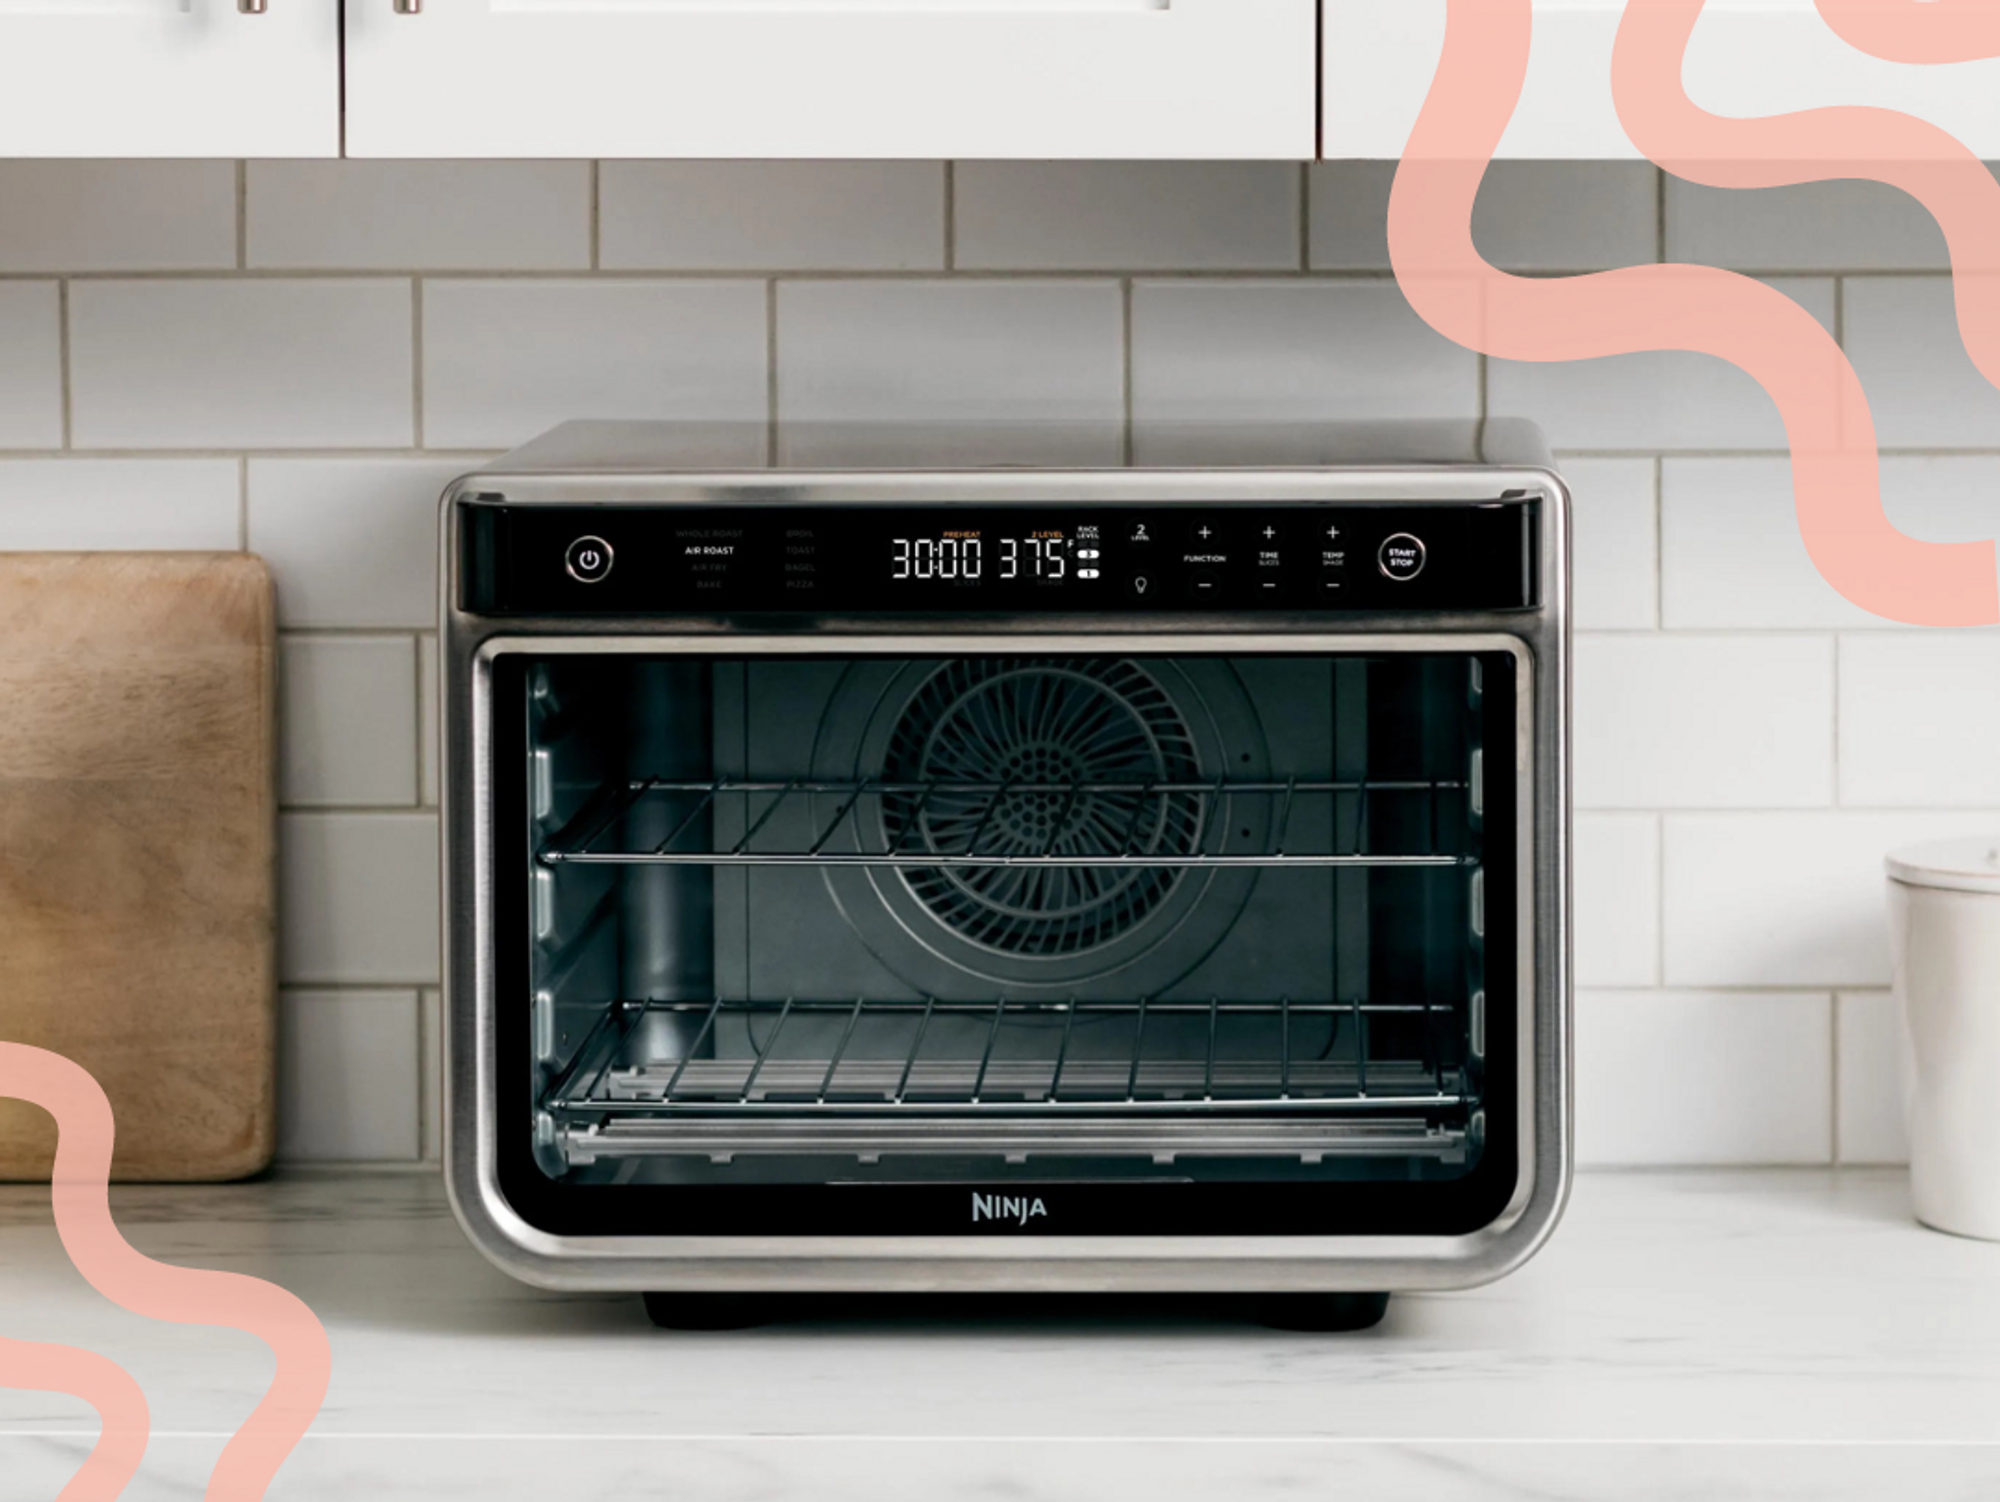 https://www.brit.co/media-library/everything-you-need-to-know-about-smart-ovens.png?id=29946667&width=2000&height=1500&coordinates=0%2C134%2C0%2C135